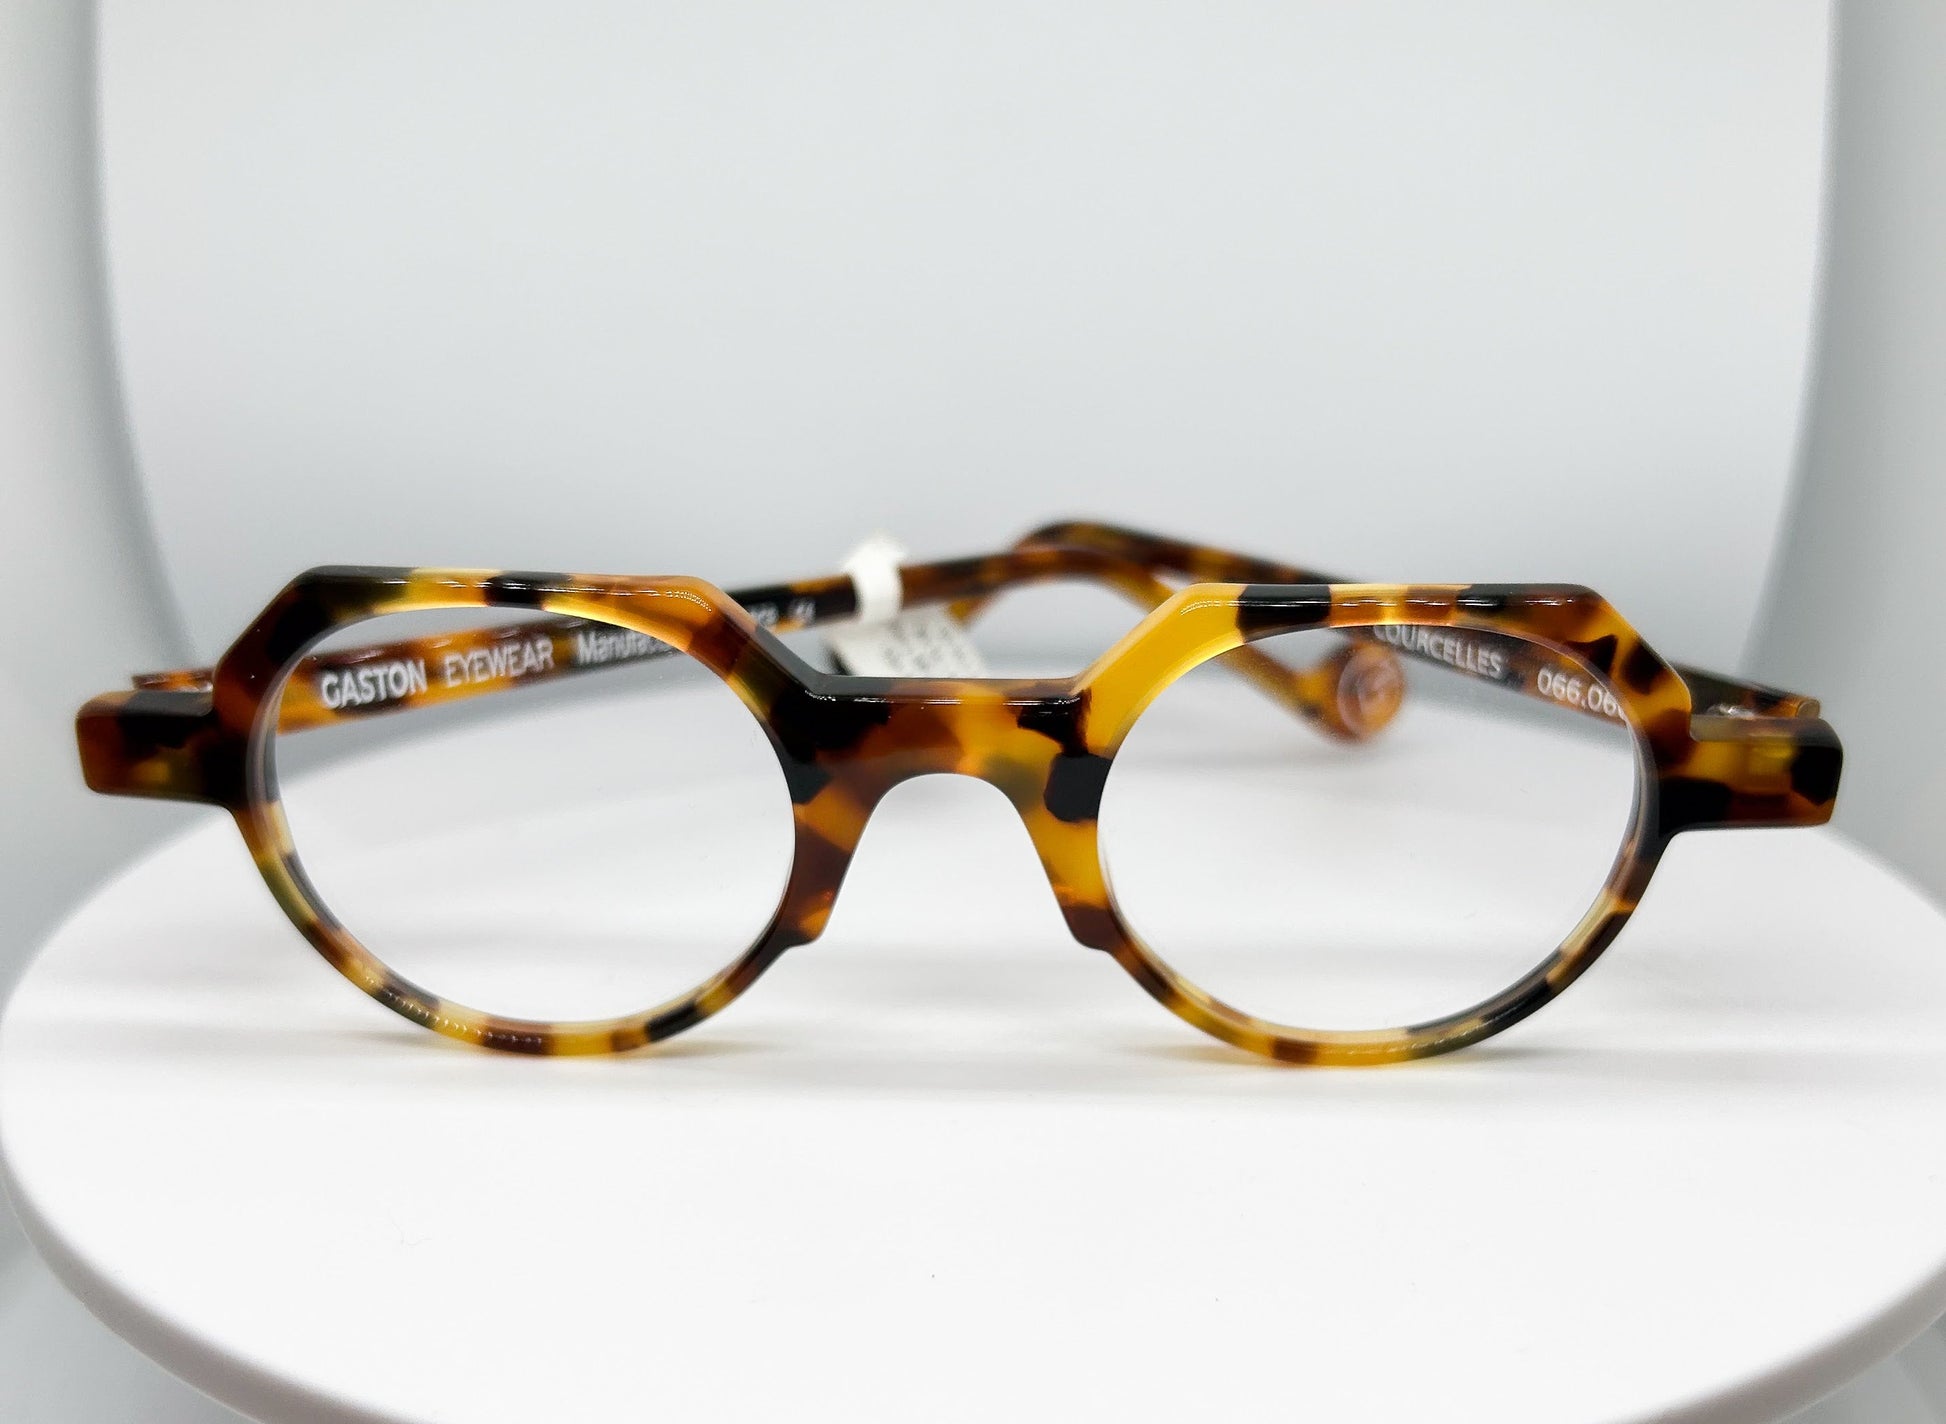 Buy Gaston Eyewear - Courcelles, a  Light Tortoise; Acetate Optical Frame with a Round with Flat Top shape. An Authorized Dealer, Adair Eyewear has a 40+ Years History of Customer Service Excellence